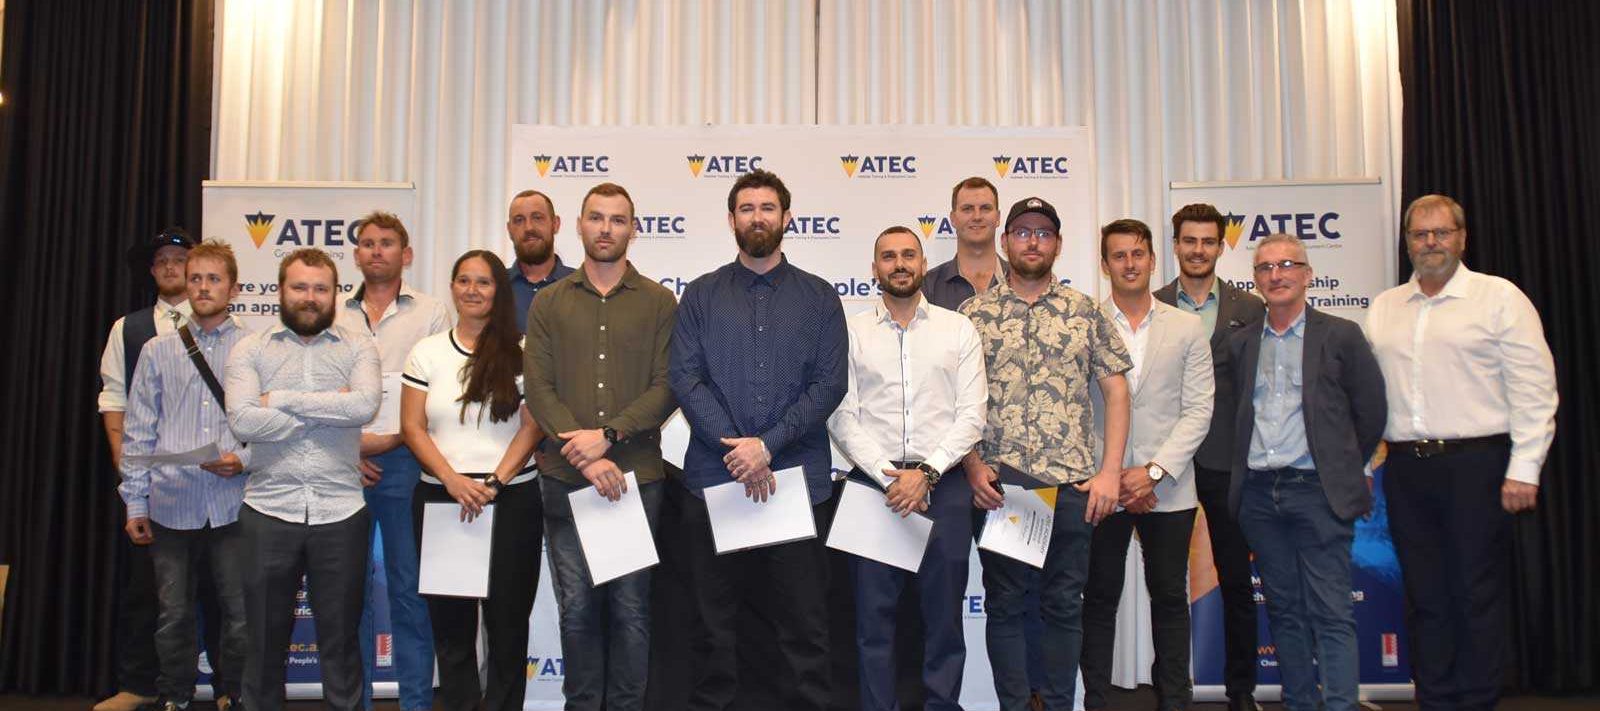 ATEC's Group Training Organisation apprenticeships adelaide finalists and winners